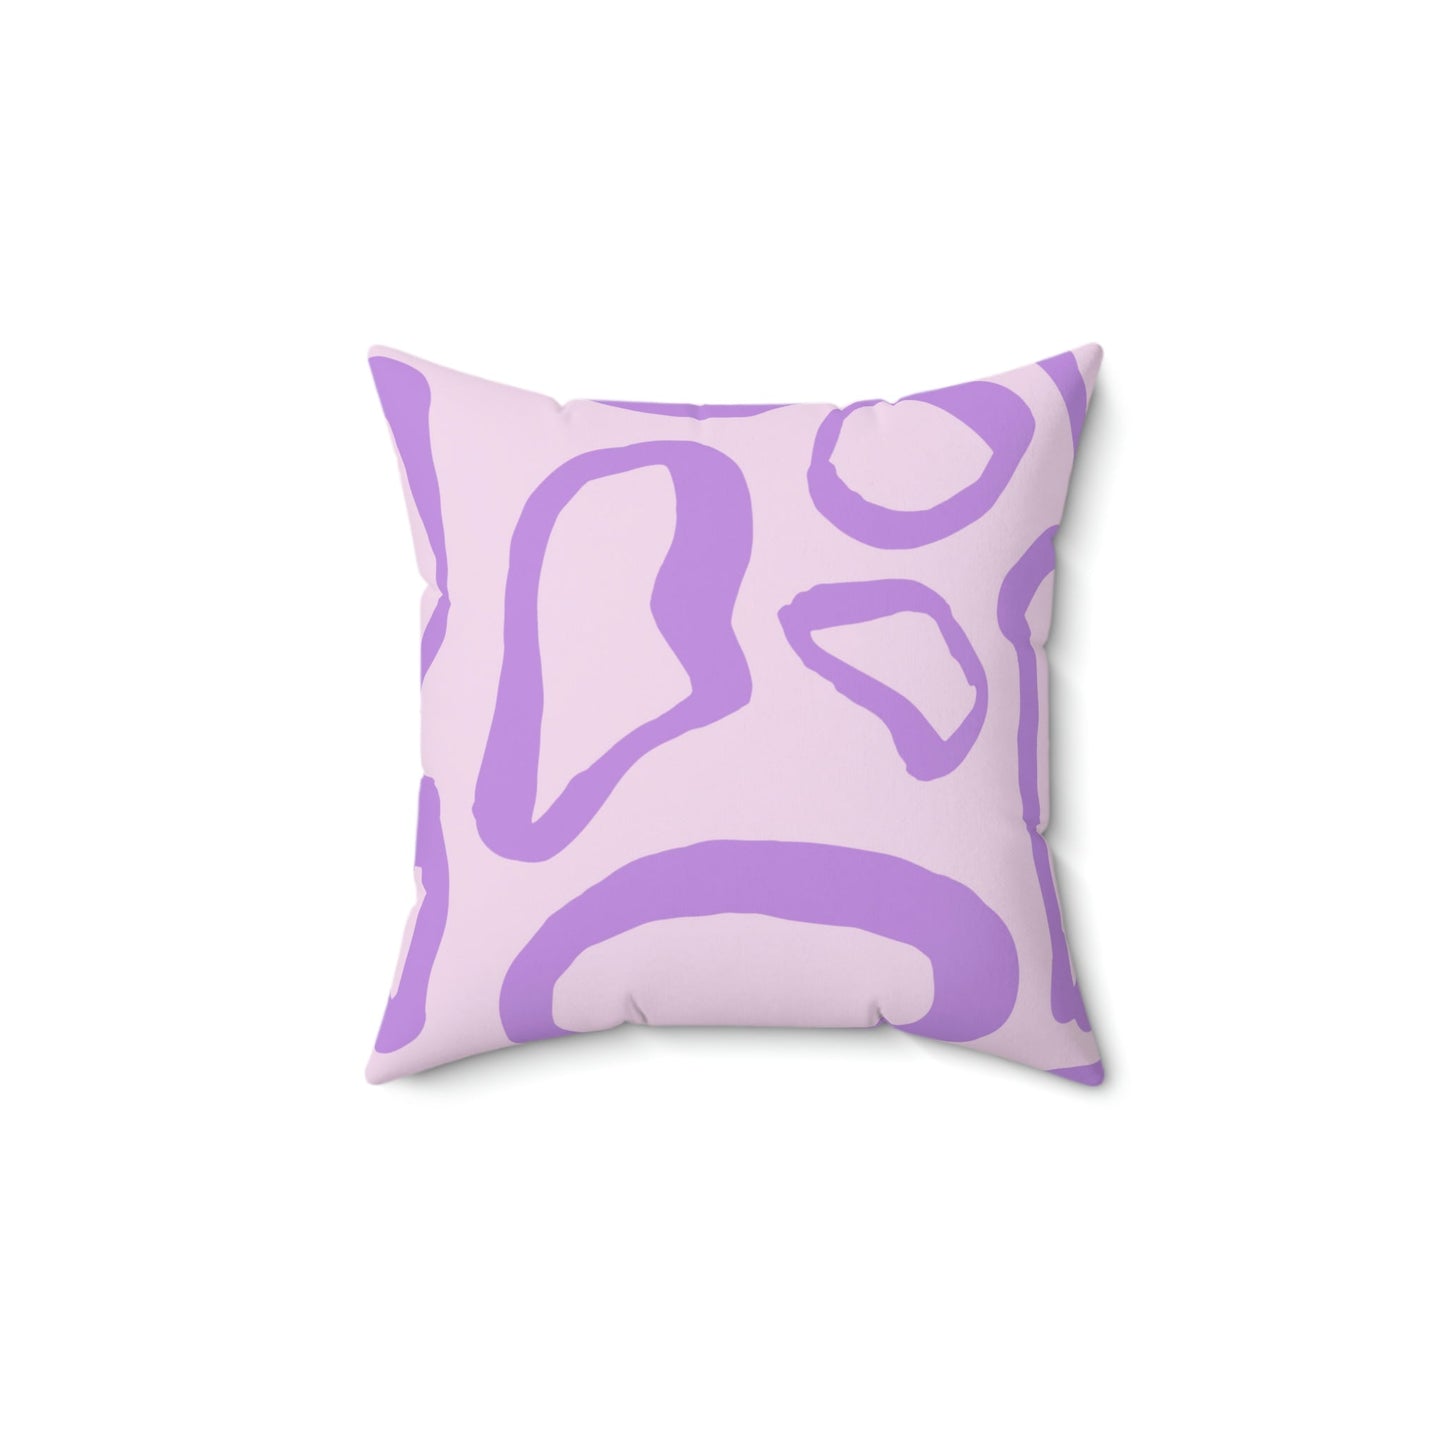 Abstract Lavender Shapes Square Pillow Home Decor Pink Sweetheart